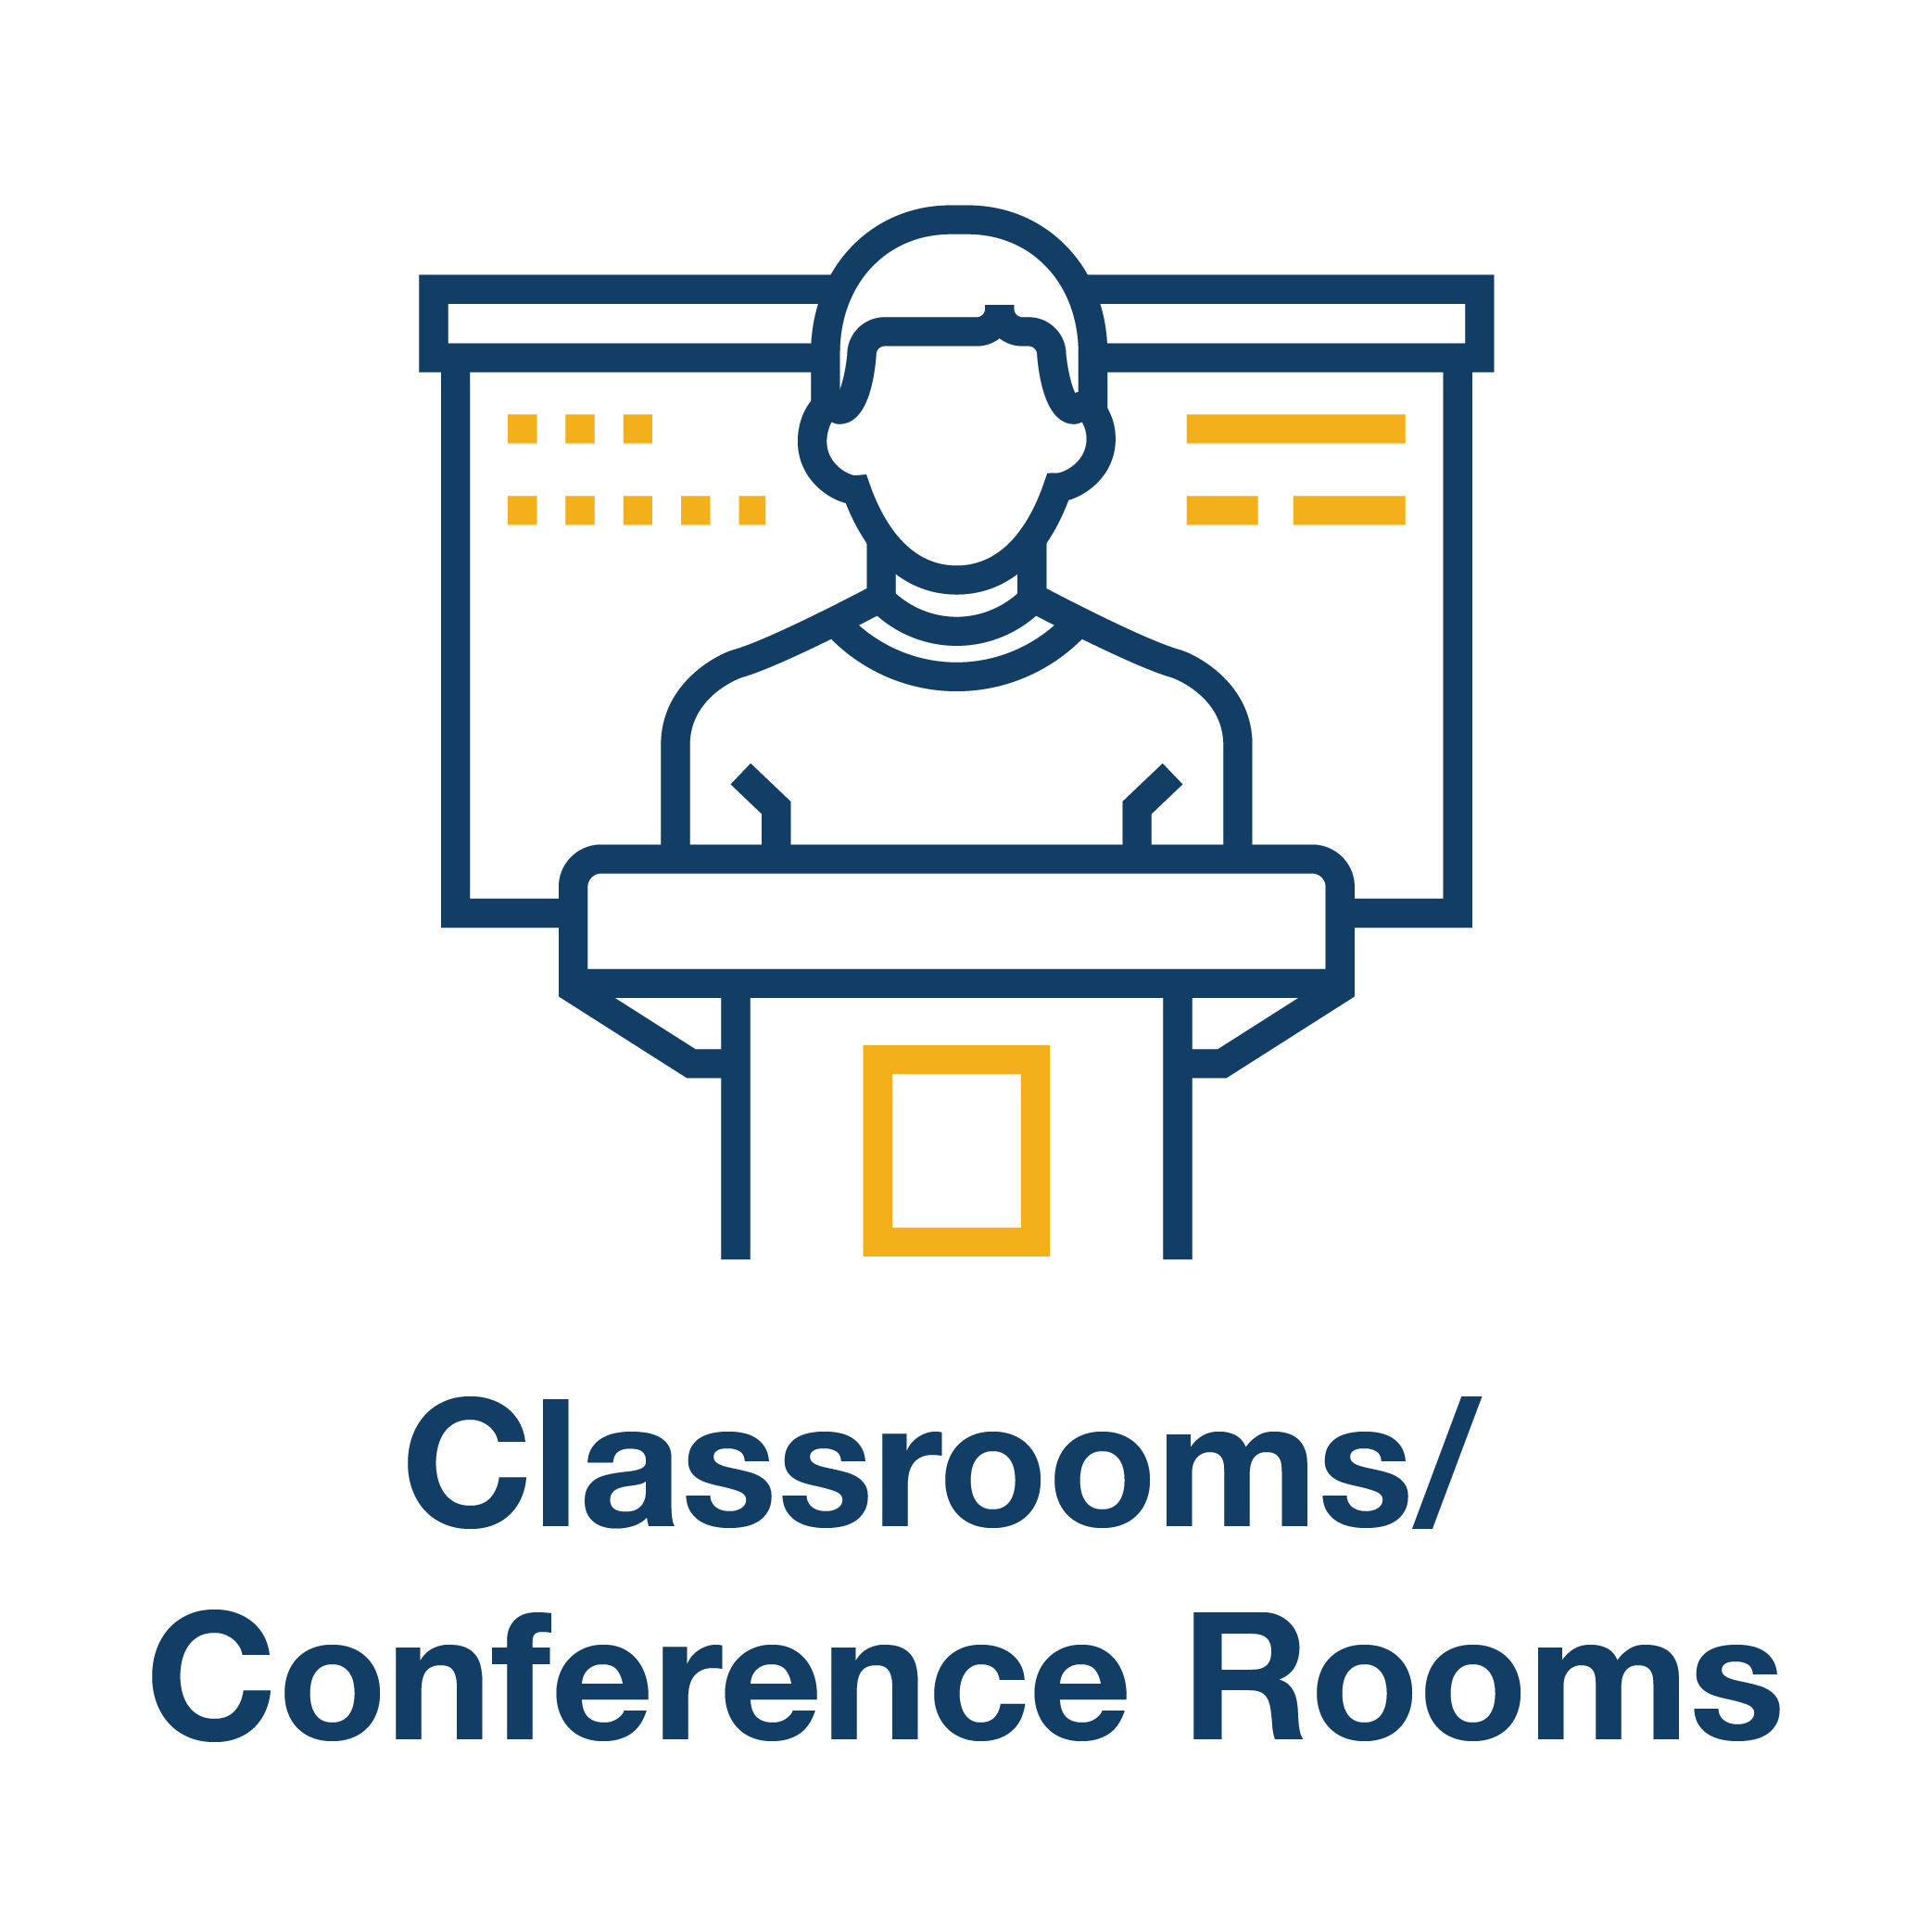 Classroom Conference Rooms